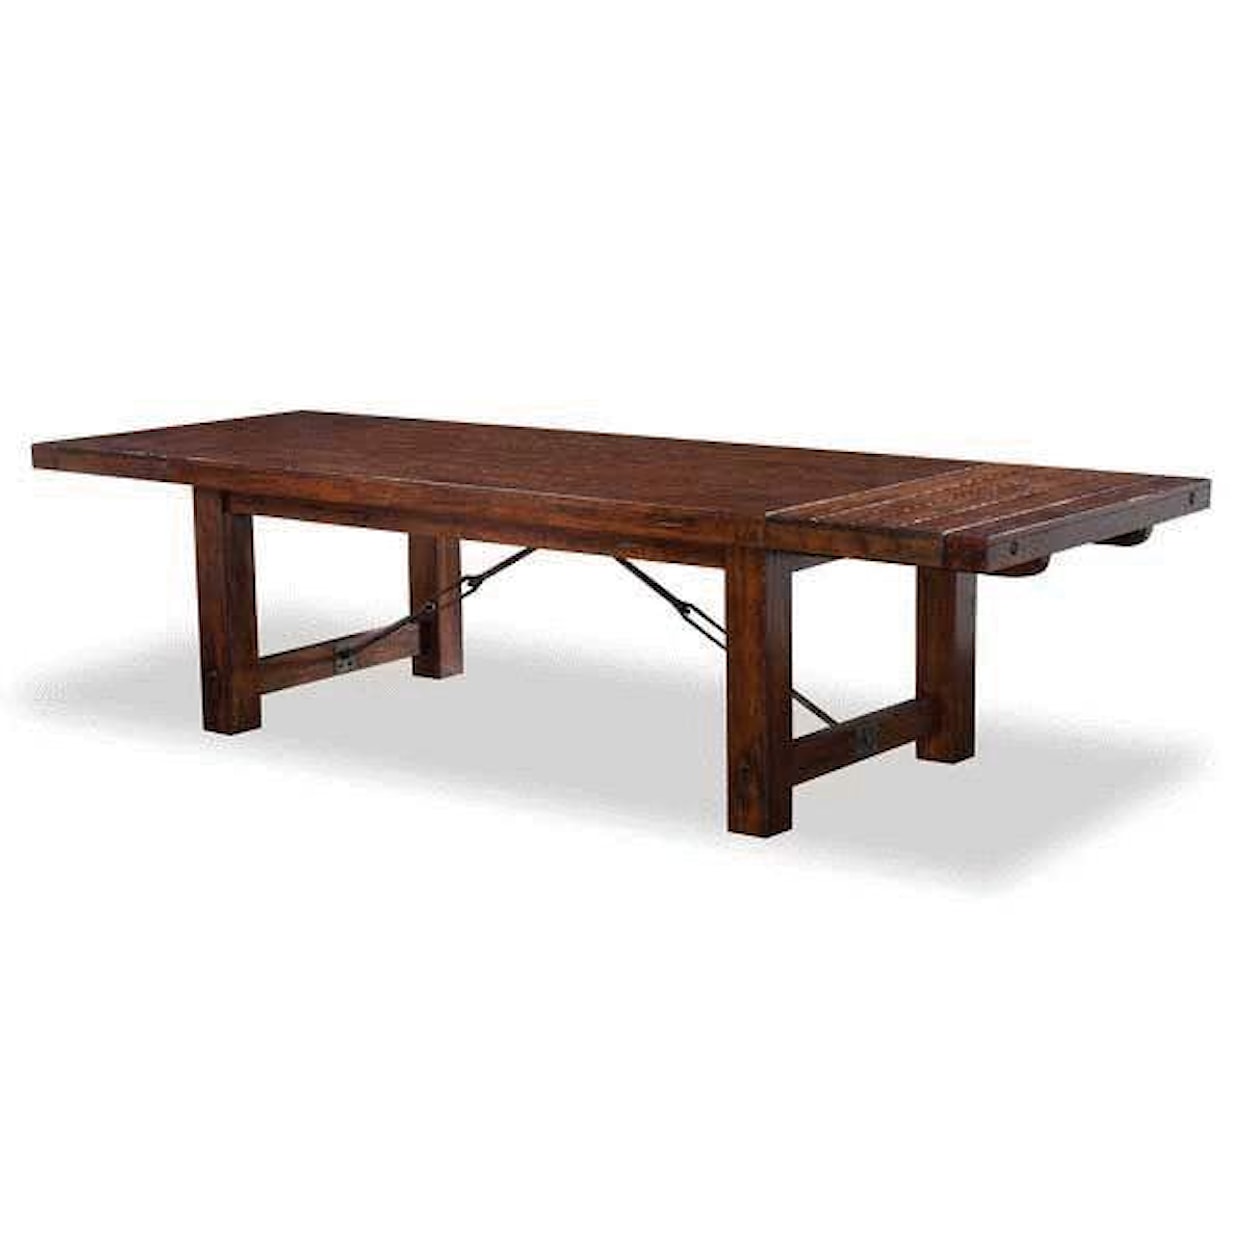 Sunny Designs Tremont Tremont Dining Table with 2 Leaves